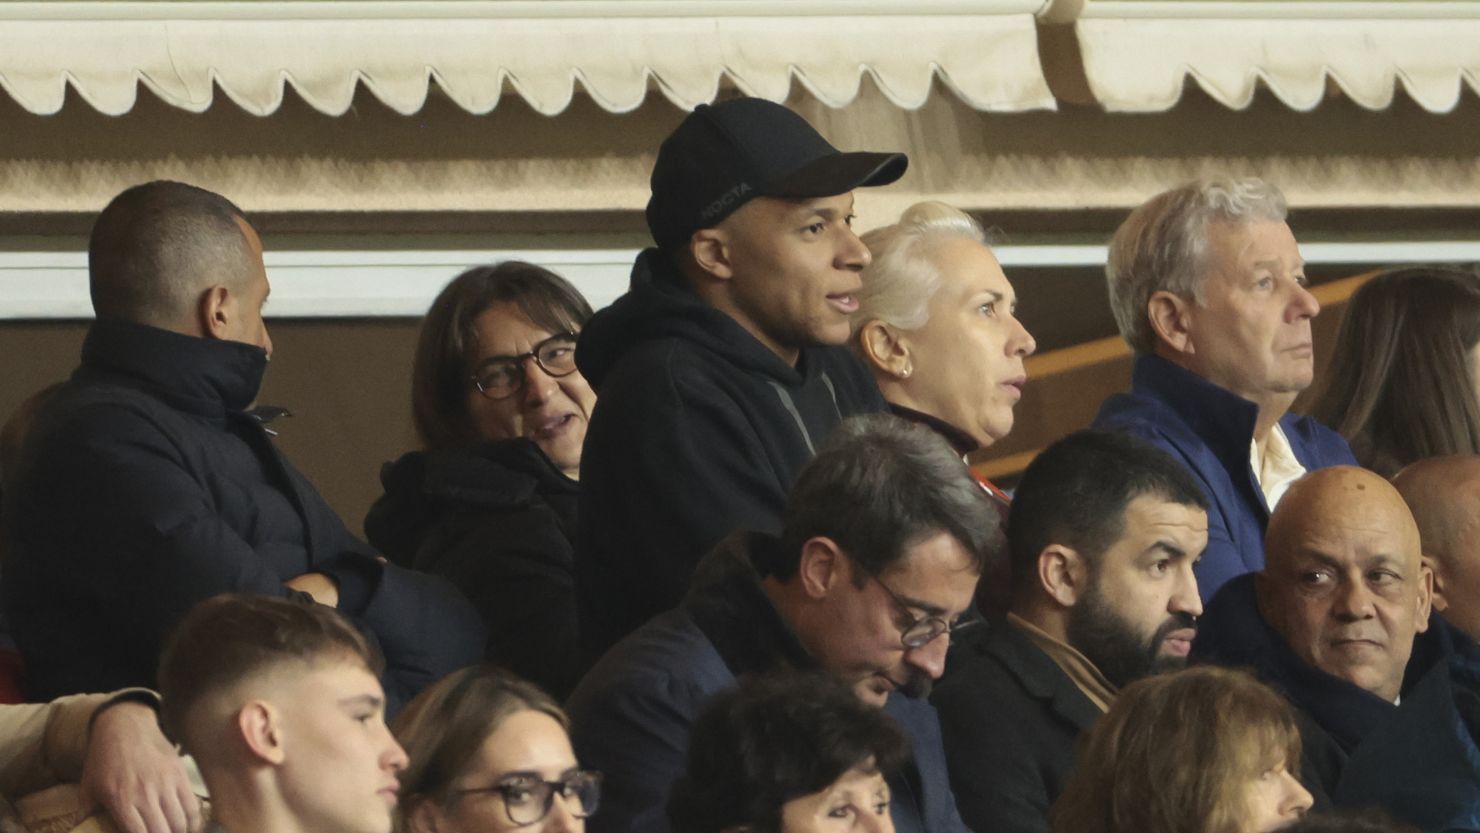 Kylian Mbappé watched much of PSG's game against Monaco from the stands with his mother Fayza Lamari.